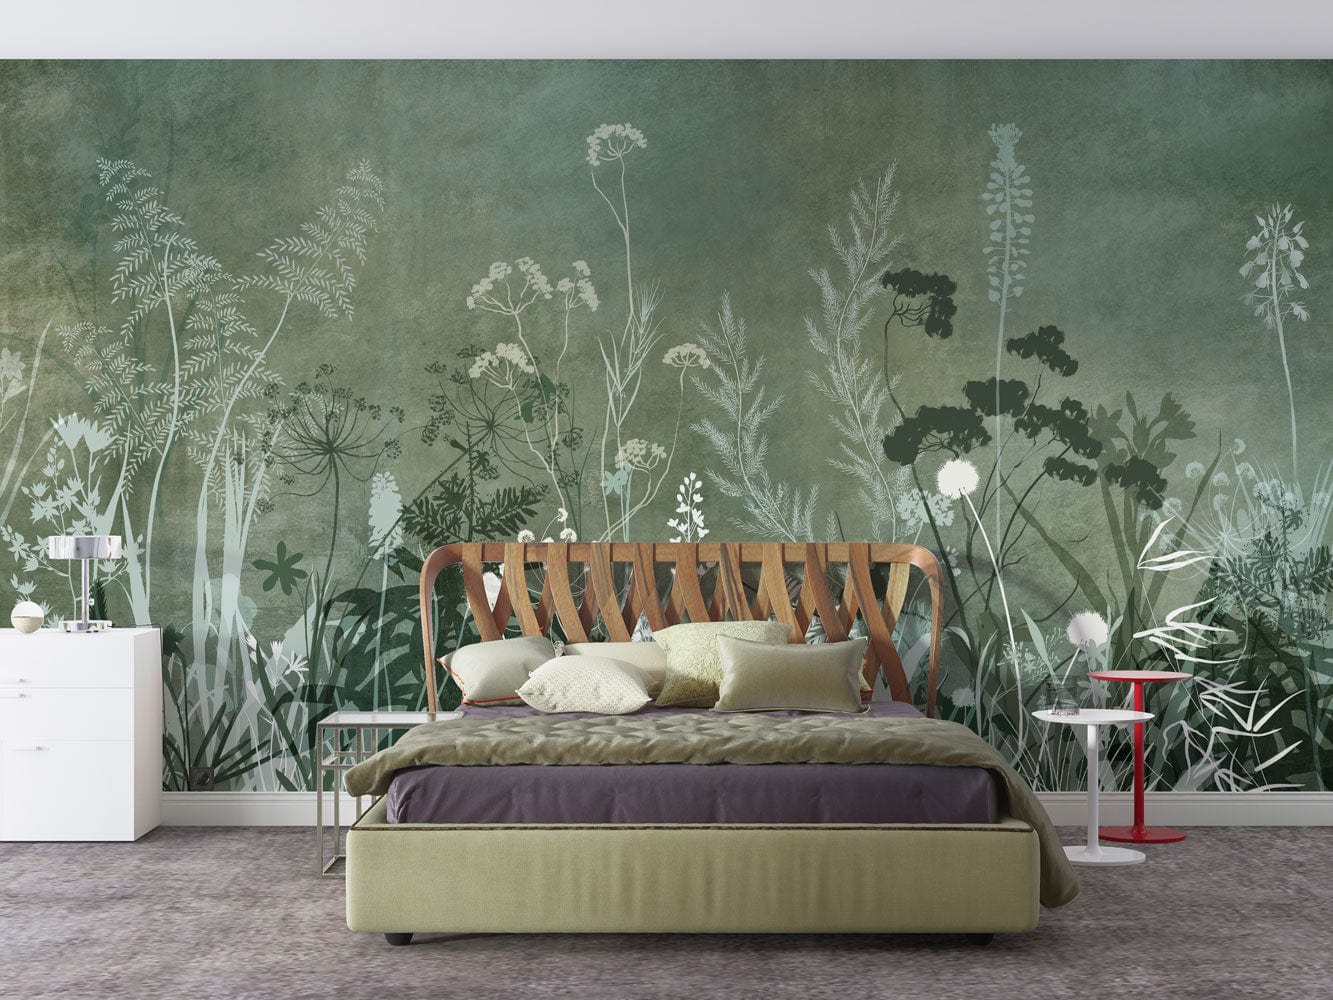 Bedroom Wall Decoration With a Silhouette of Green Bushes on a Wallpaper Mural